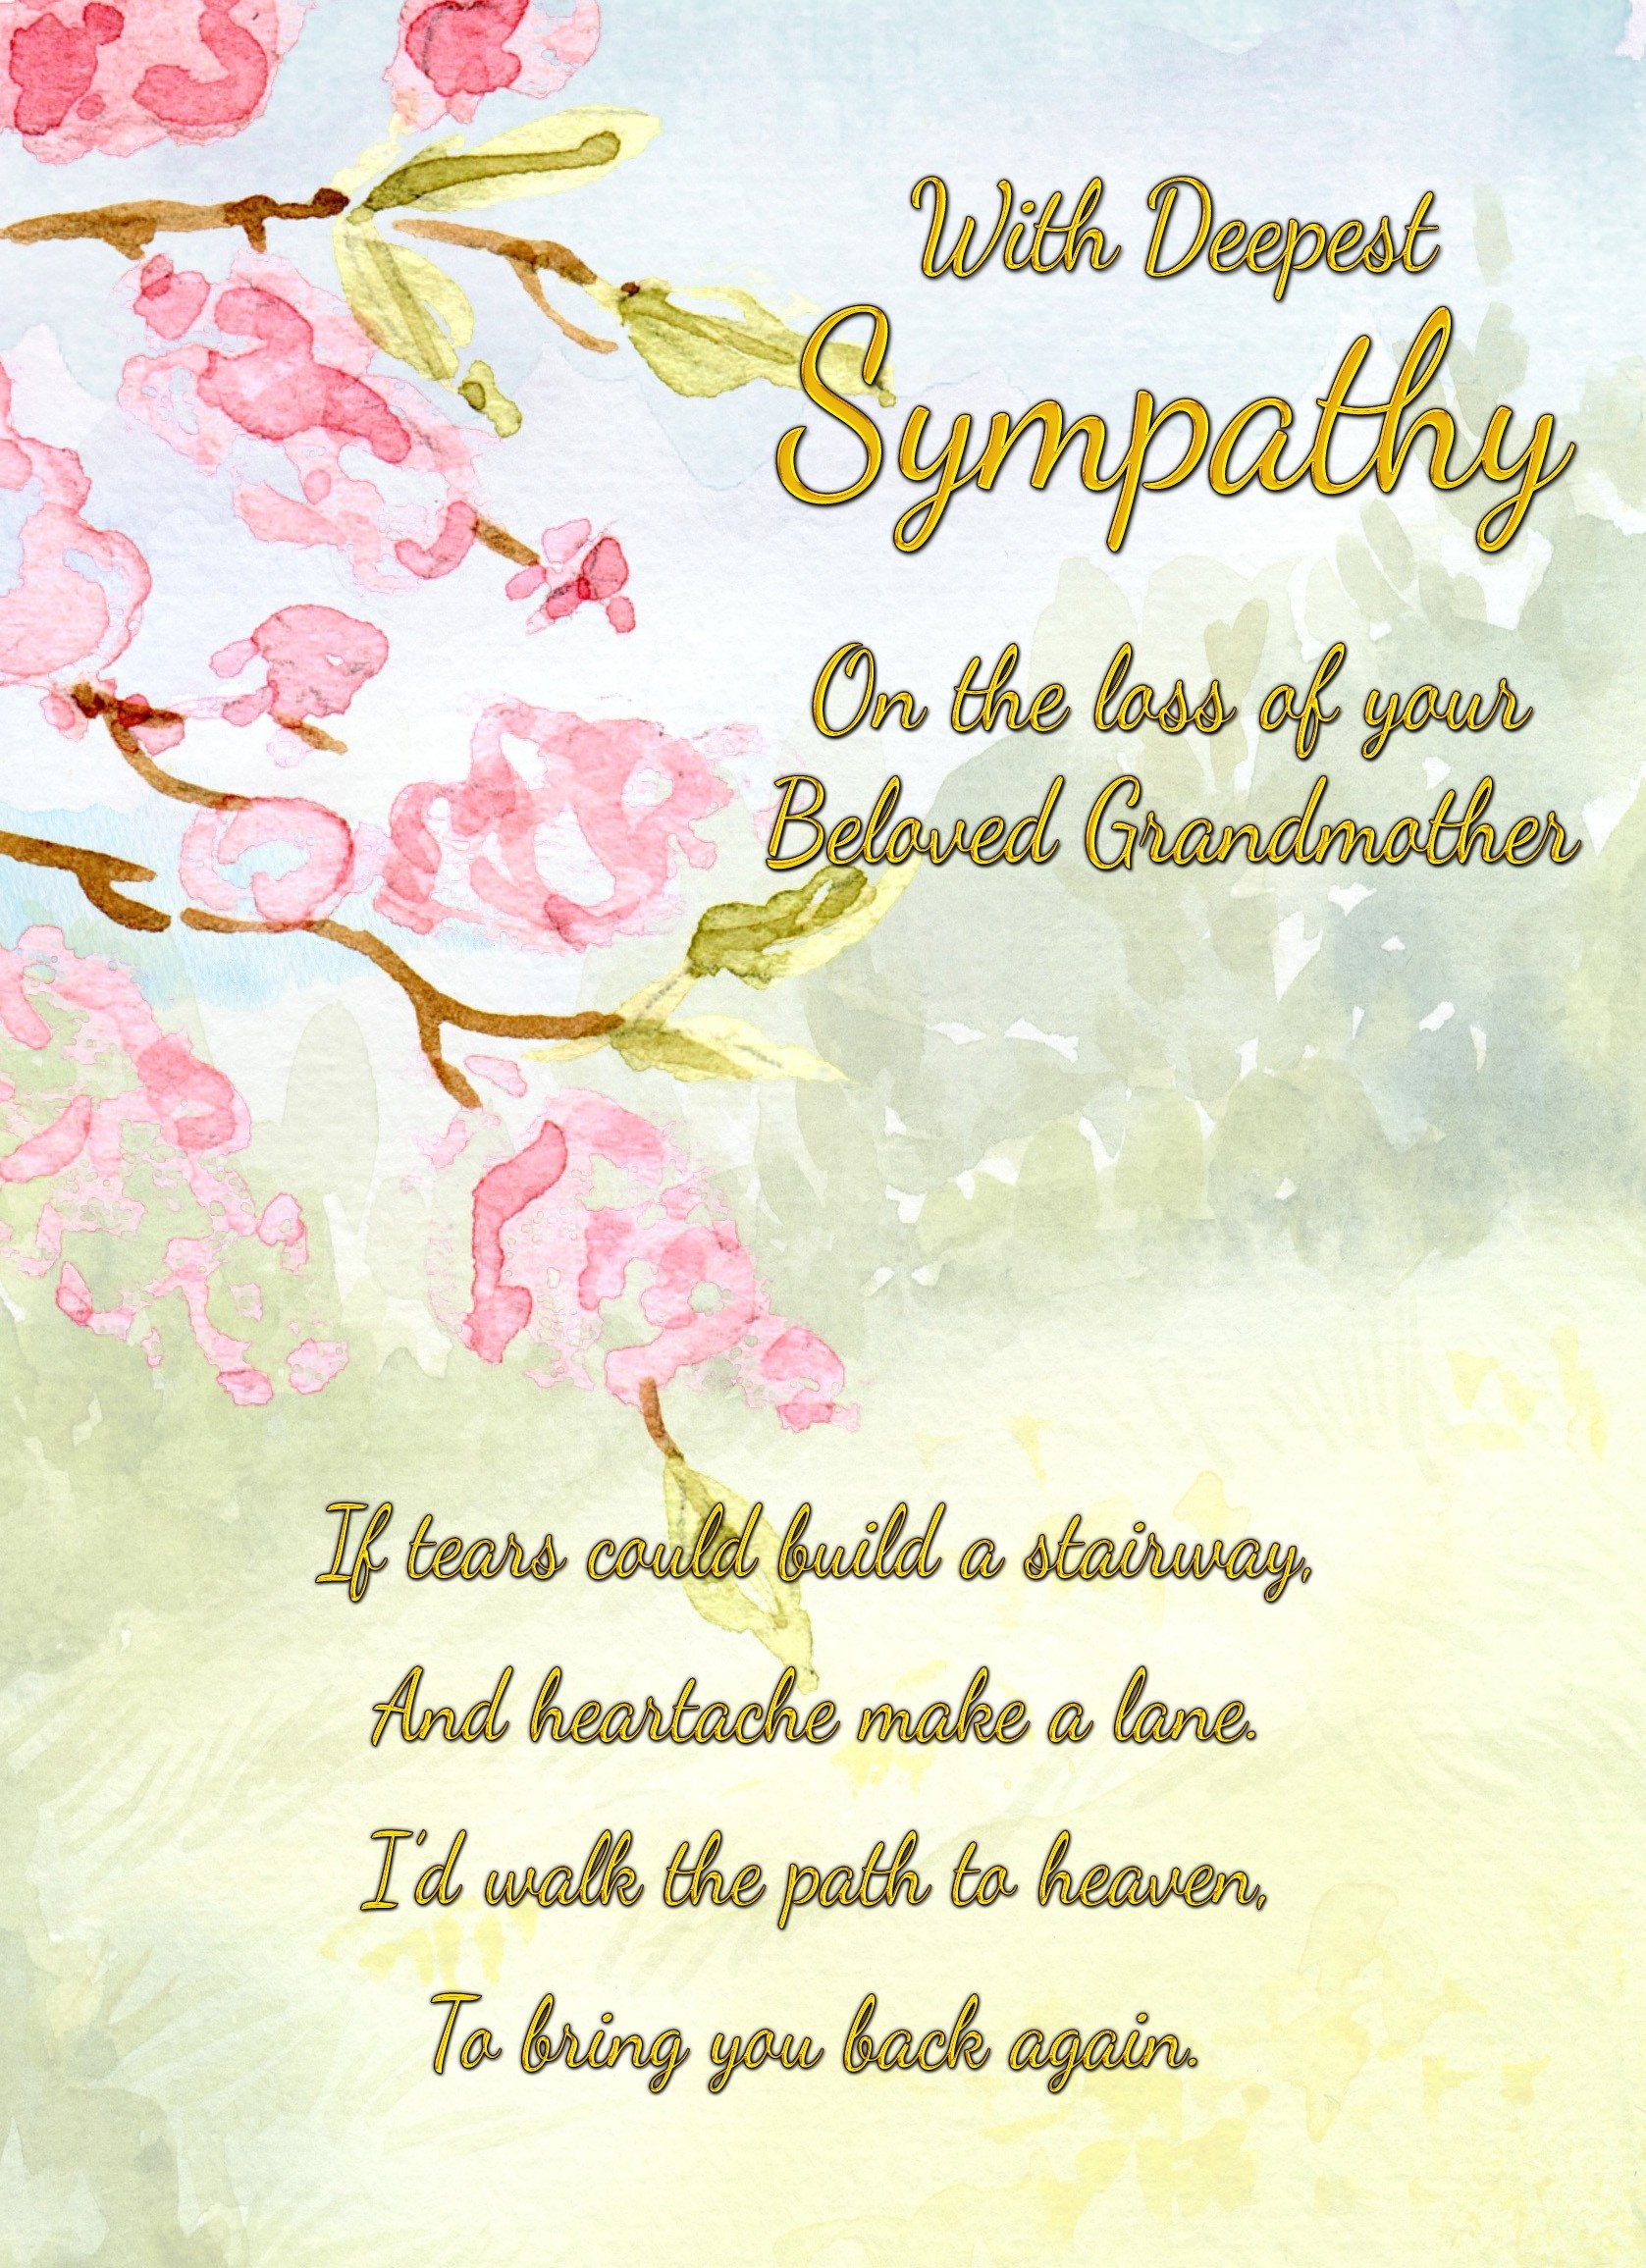 Sympathy Bereavement Card (With Deepest Sympathy, Beloved Grandmother)